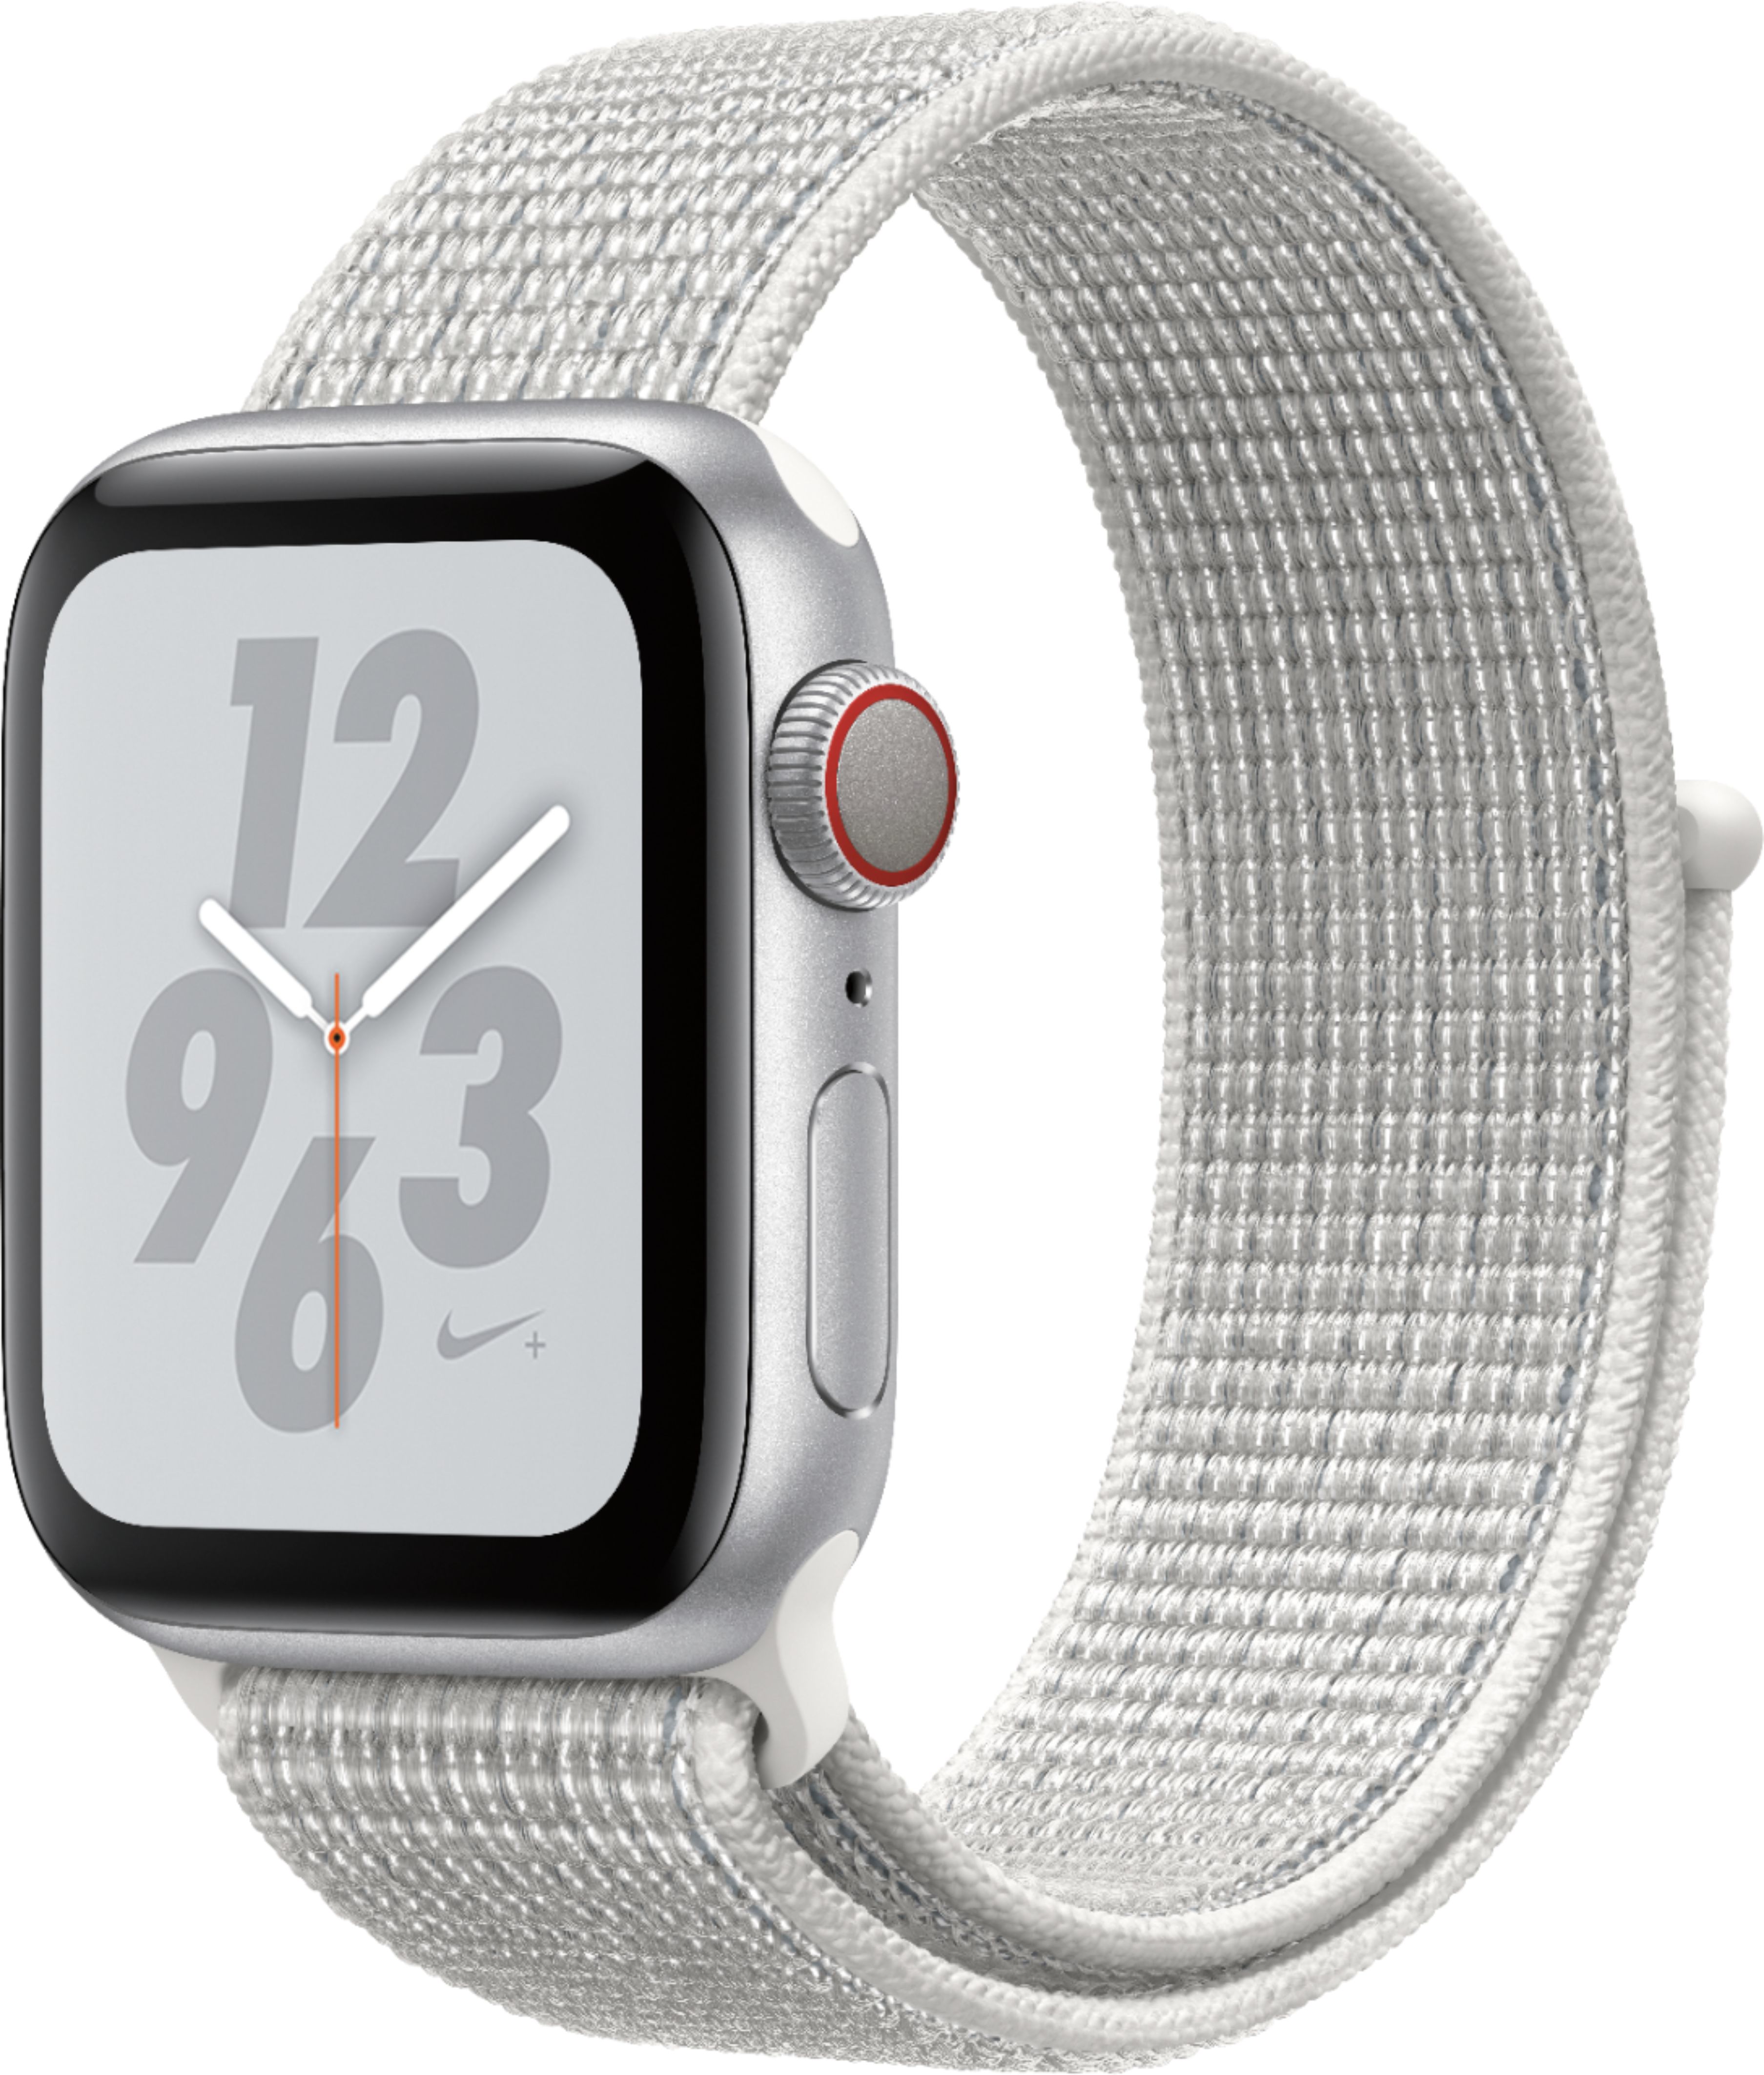 Apple Watch Nike+ Series 4 (GPS Cellular) 40mm Silver Aluminum with Summit White Nike Sport Loop Aluminum MTX72LL/A - Best Buy